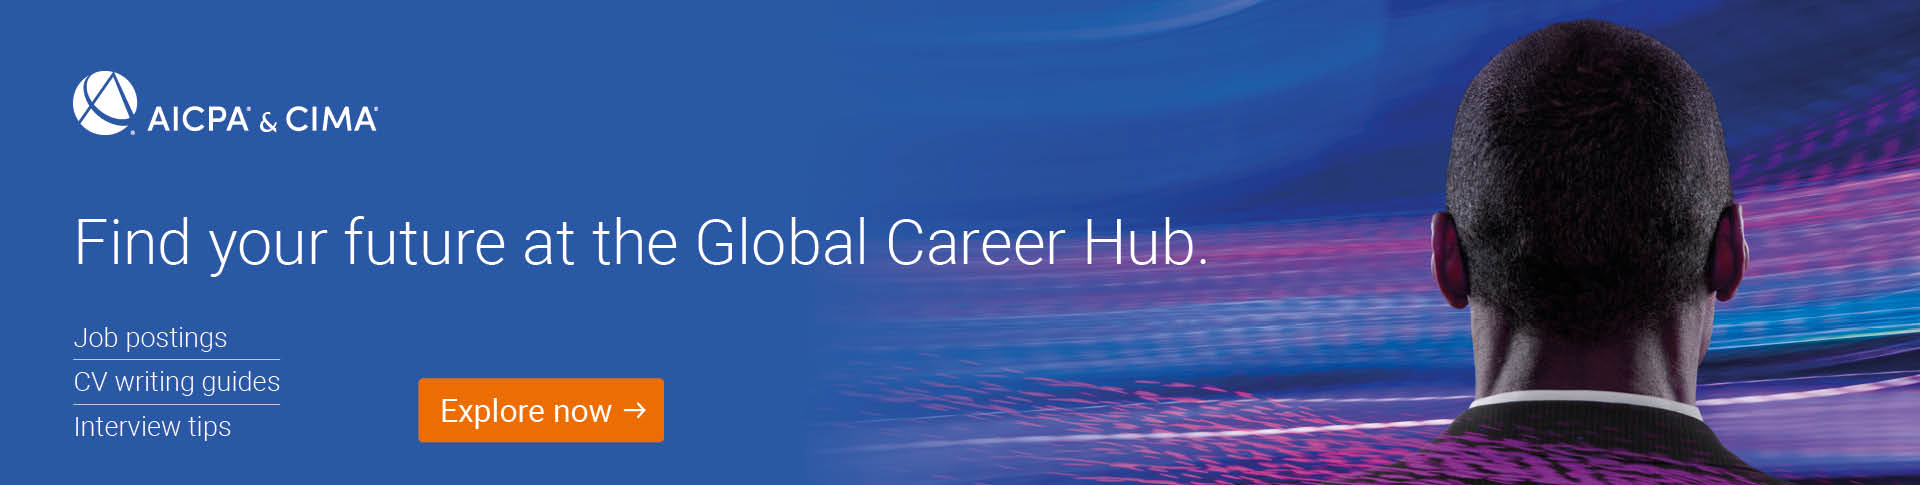 Find the future at the Global Career Hub - Job postings, CV writing guides, interview tips